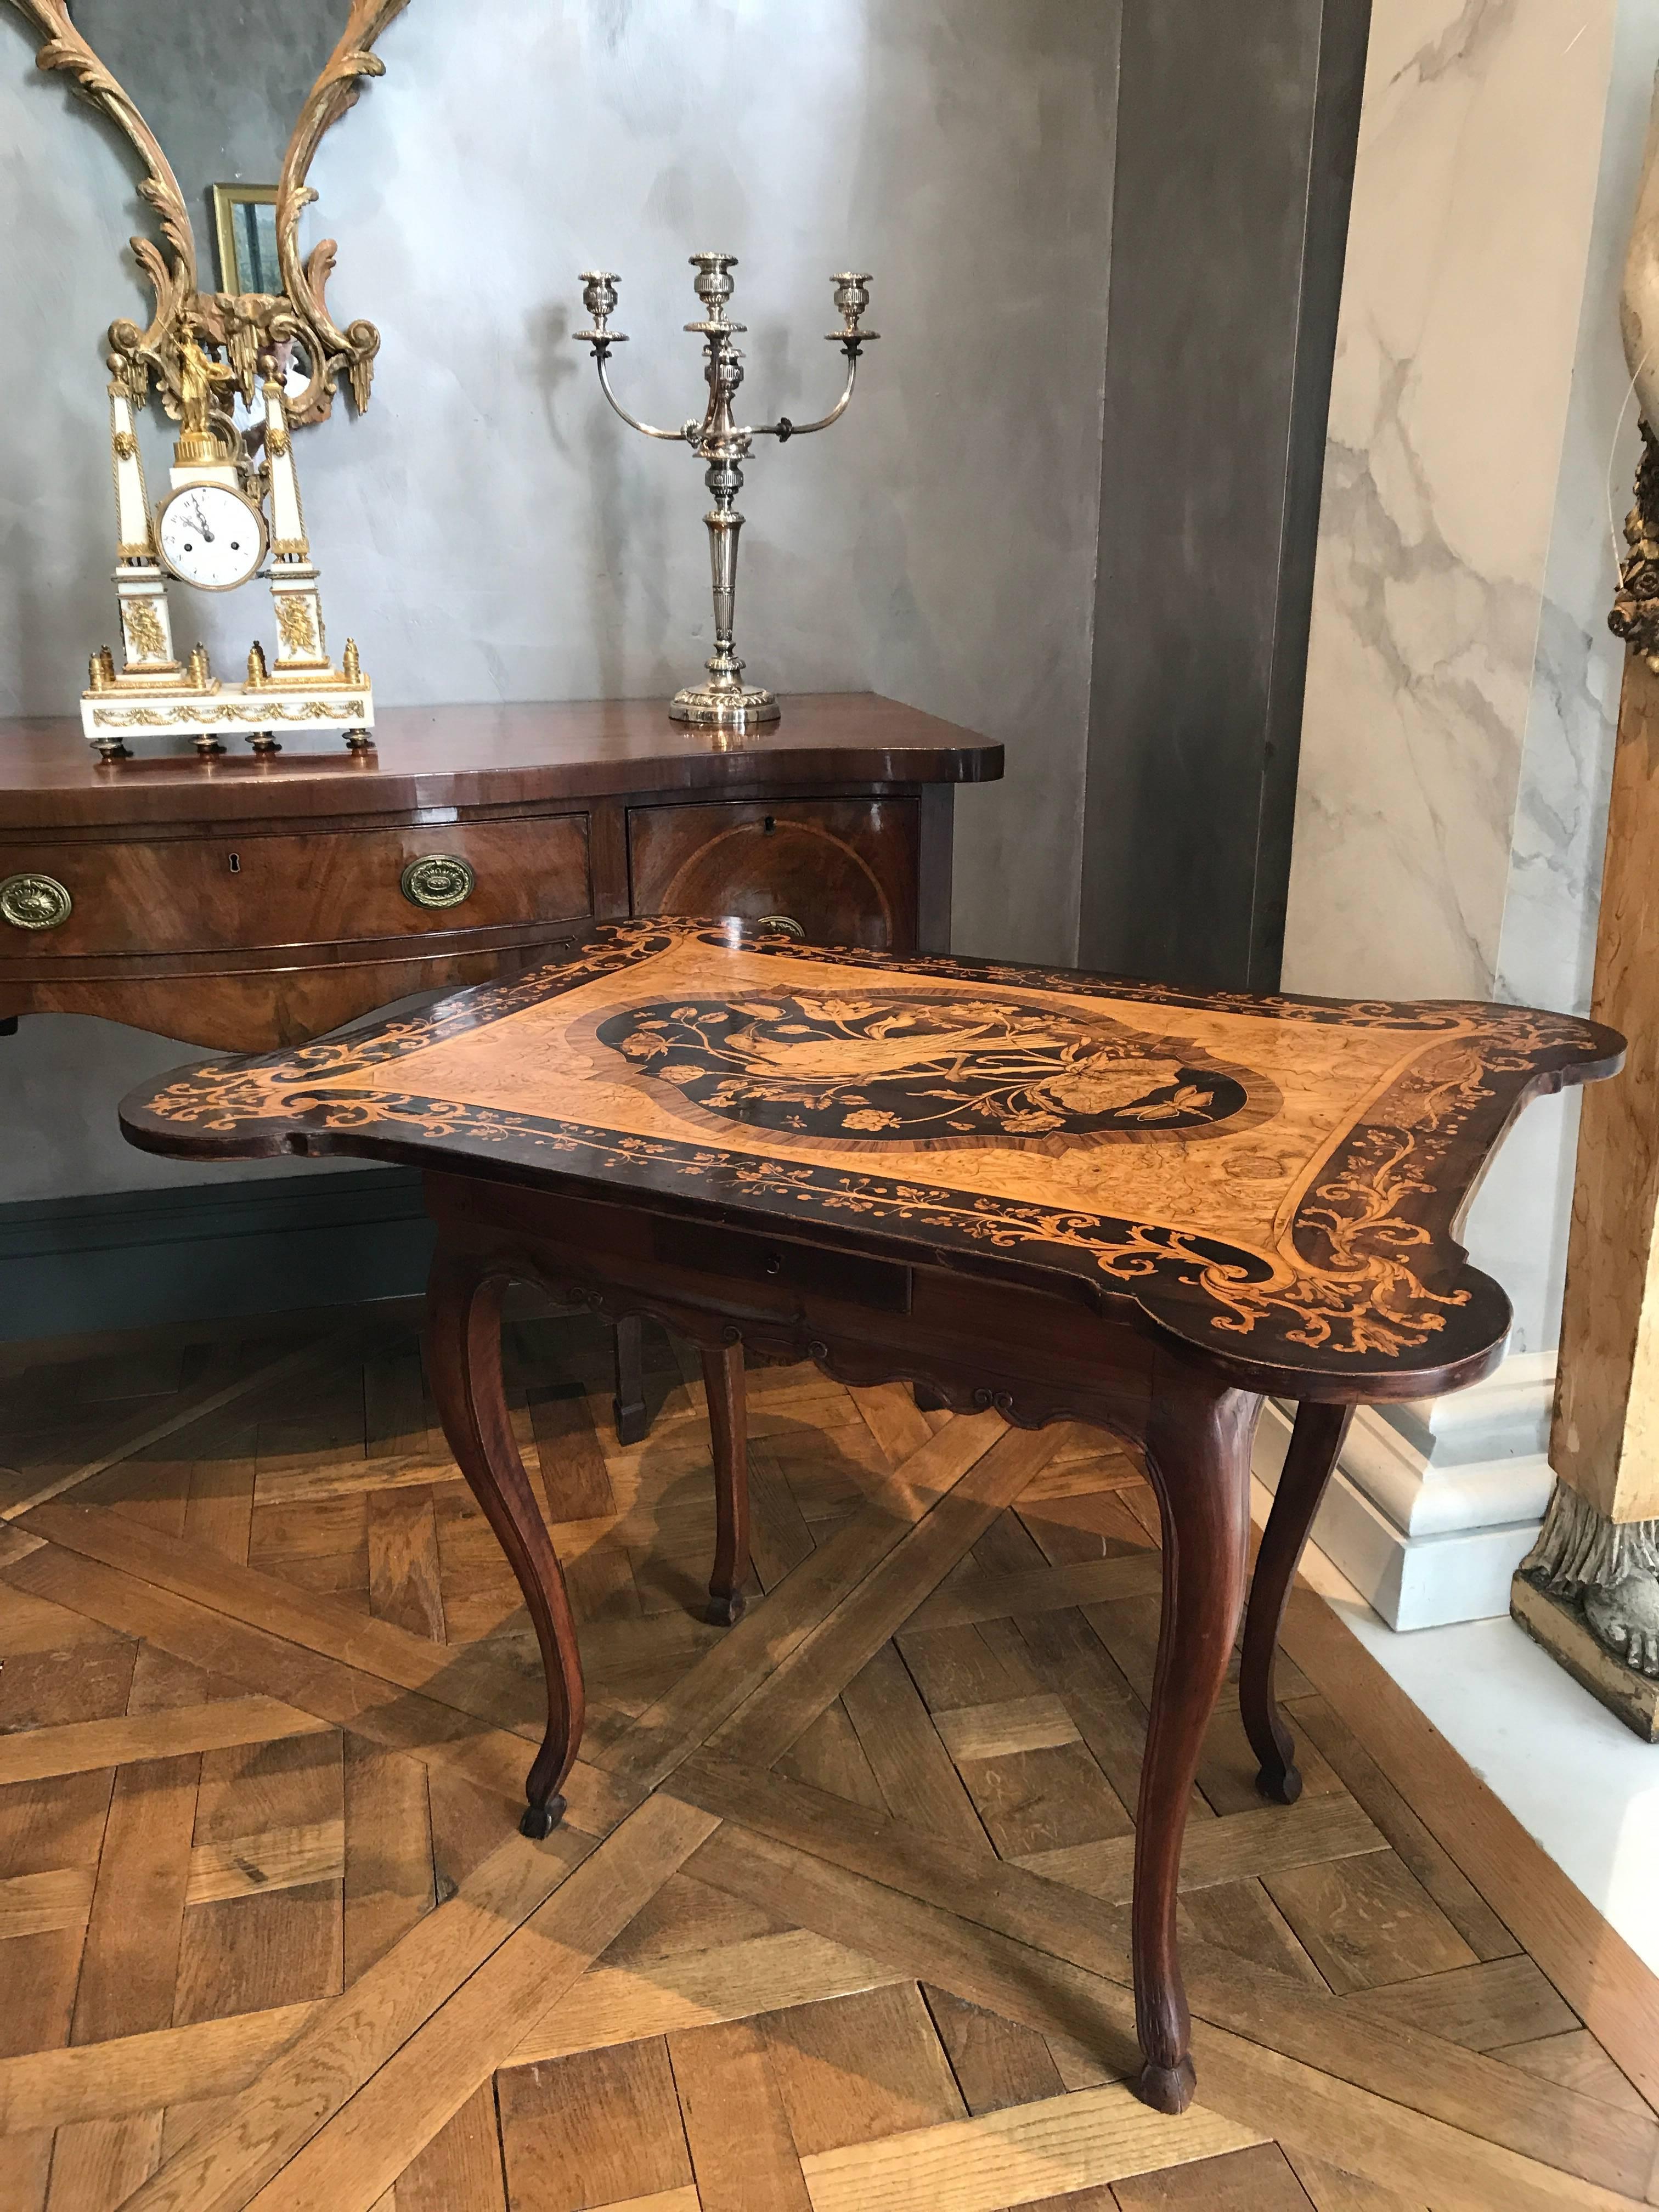 A breathtaking masterpiece in marquetry produced in the late 18th century in Holland. The top depicts a Heron surrounded by butterflies, dragonflies and flowers and is framed in a foliate motif. The woods used are olivewood, kingwood, tulipwood,